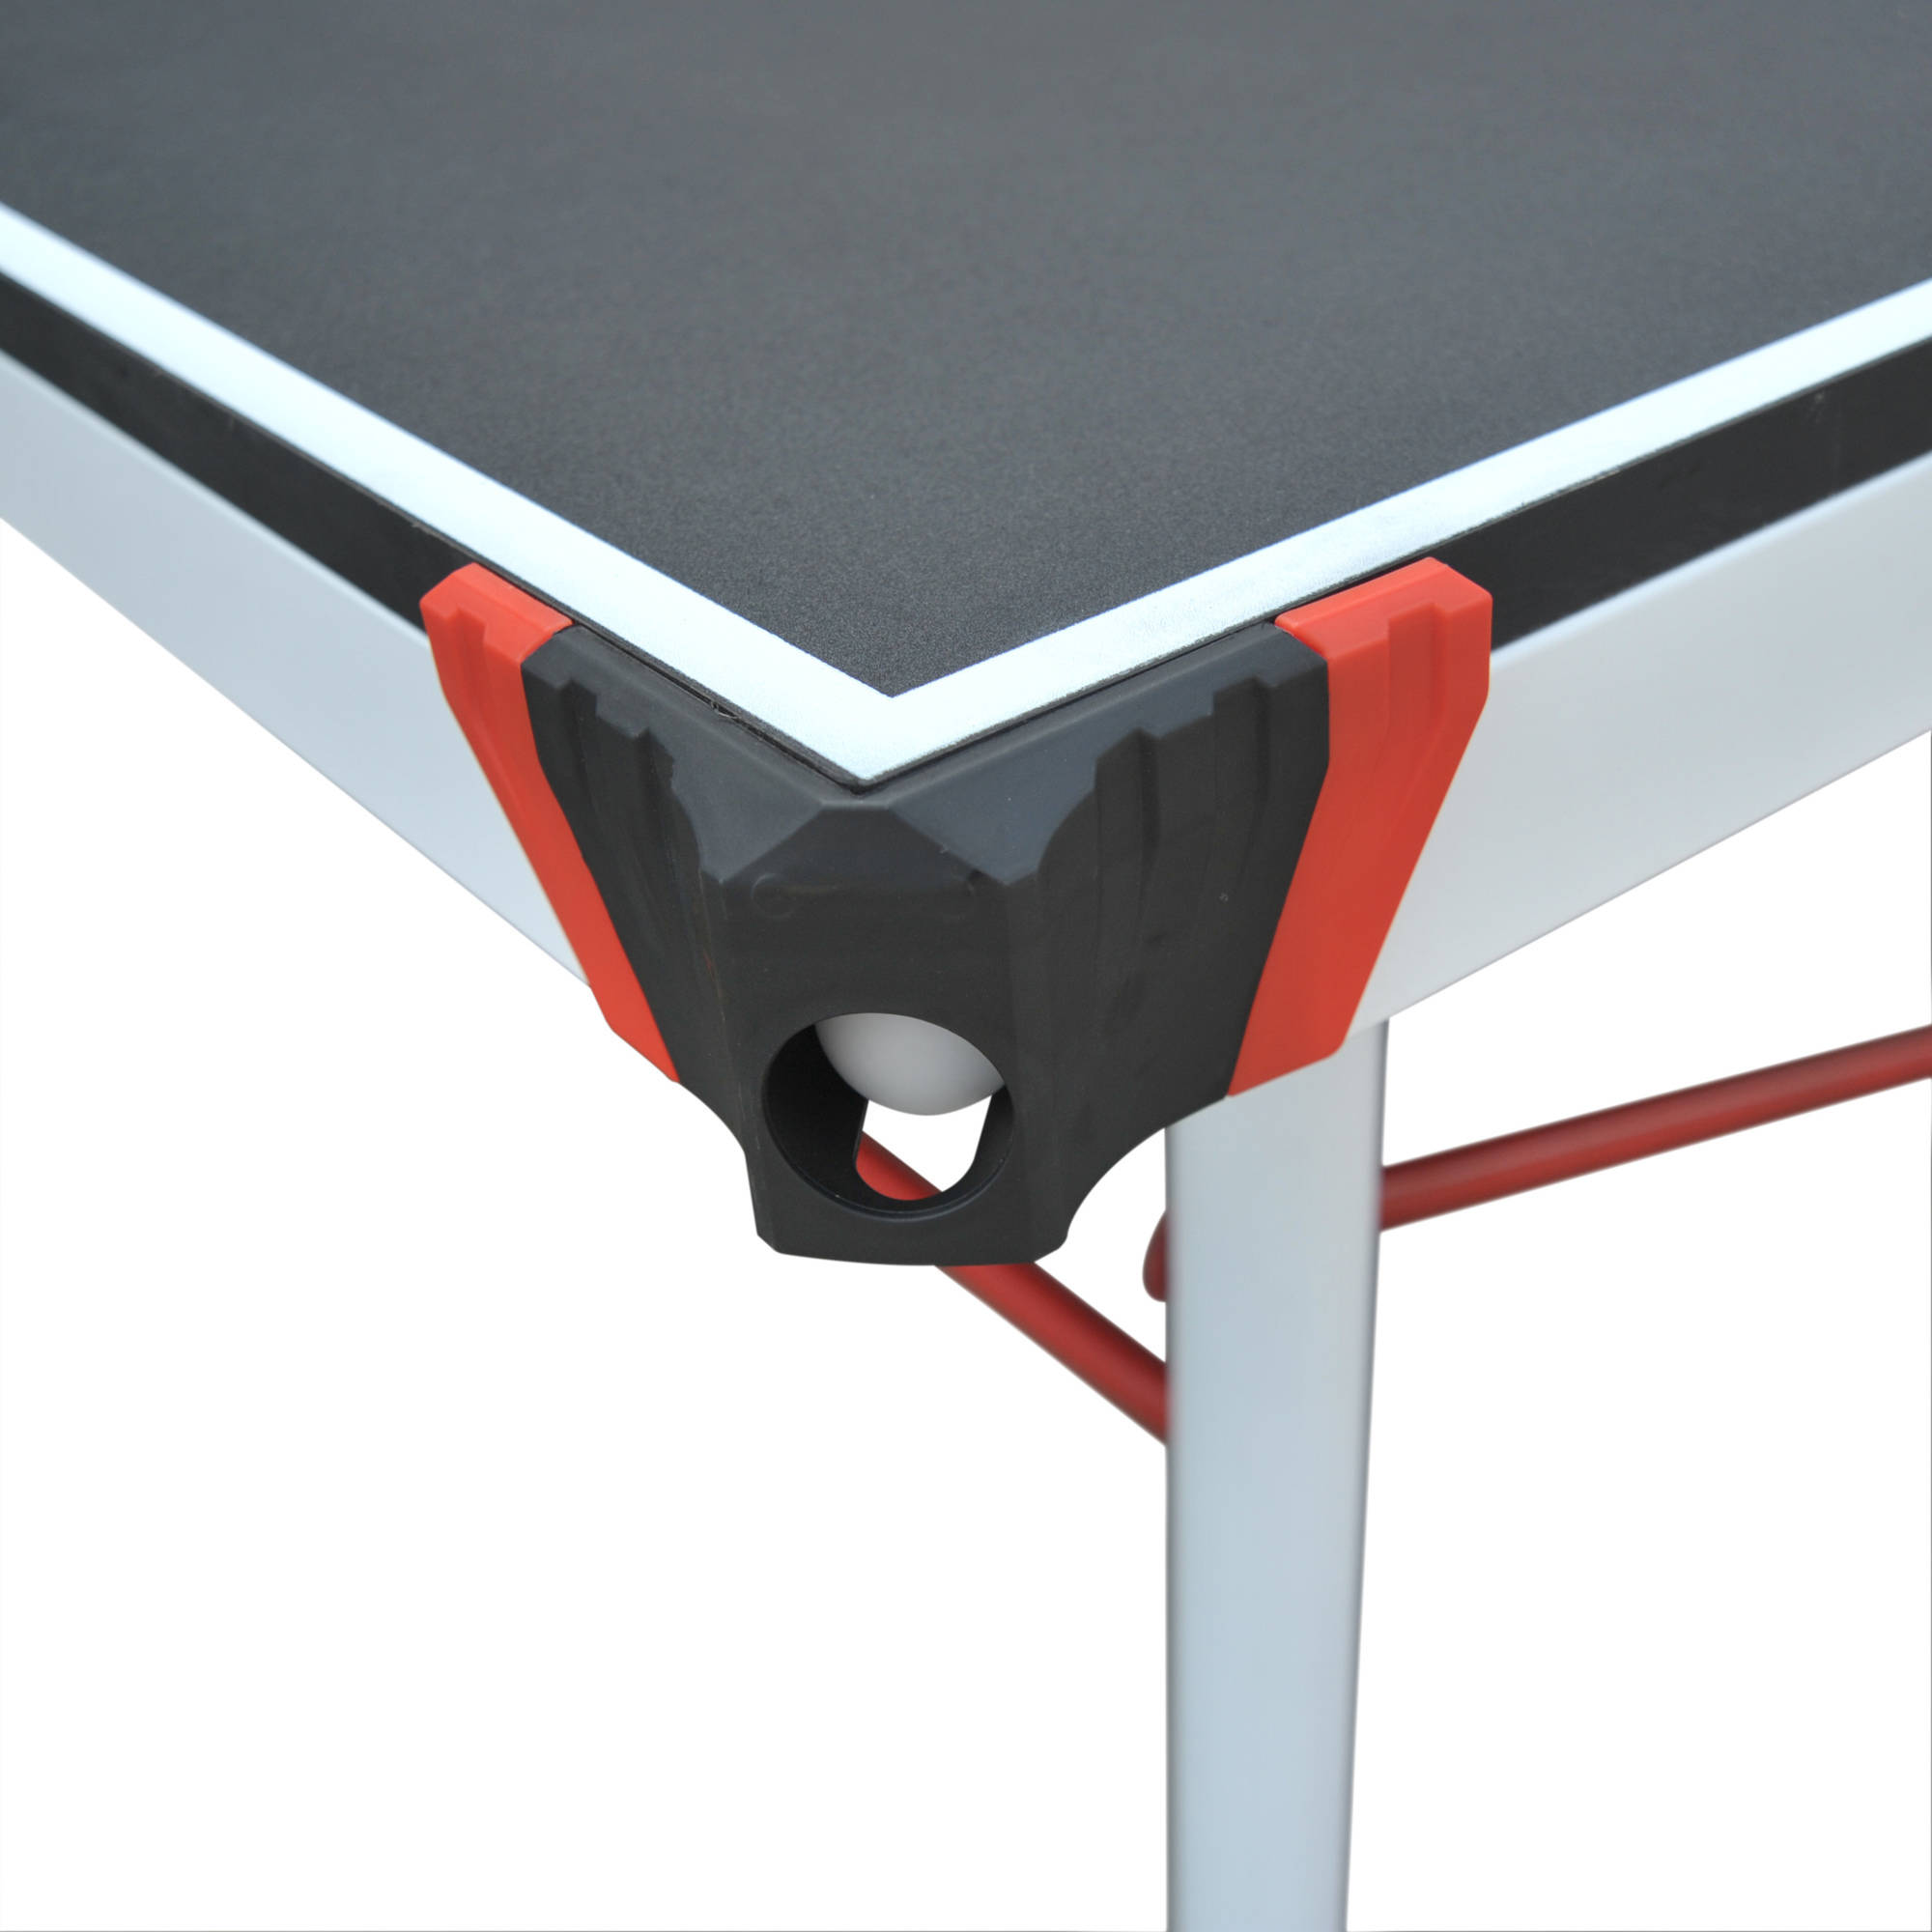 EastPoint Sports EPS 5000 2-Piece Table Tennis Table - 25mm Top - image 2 of 5